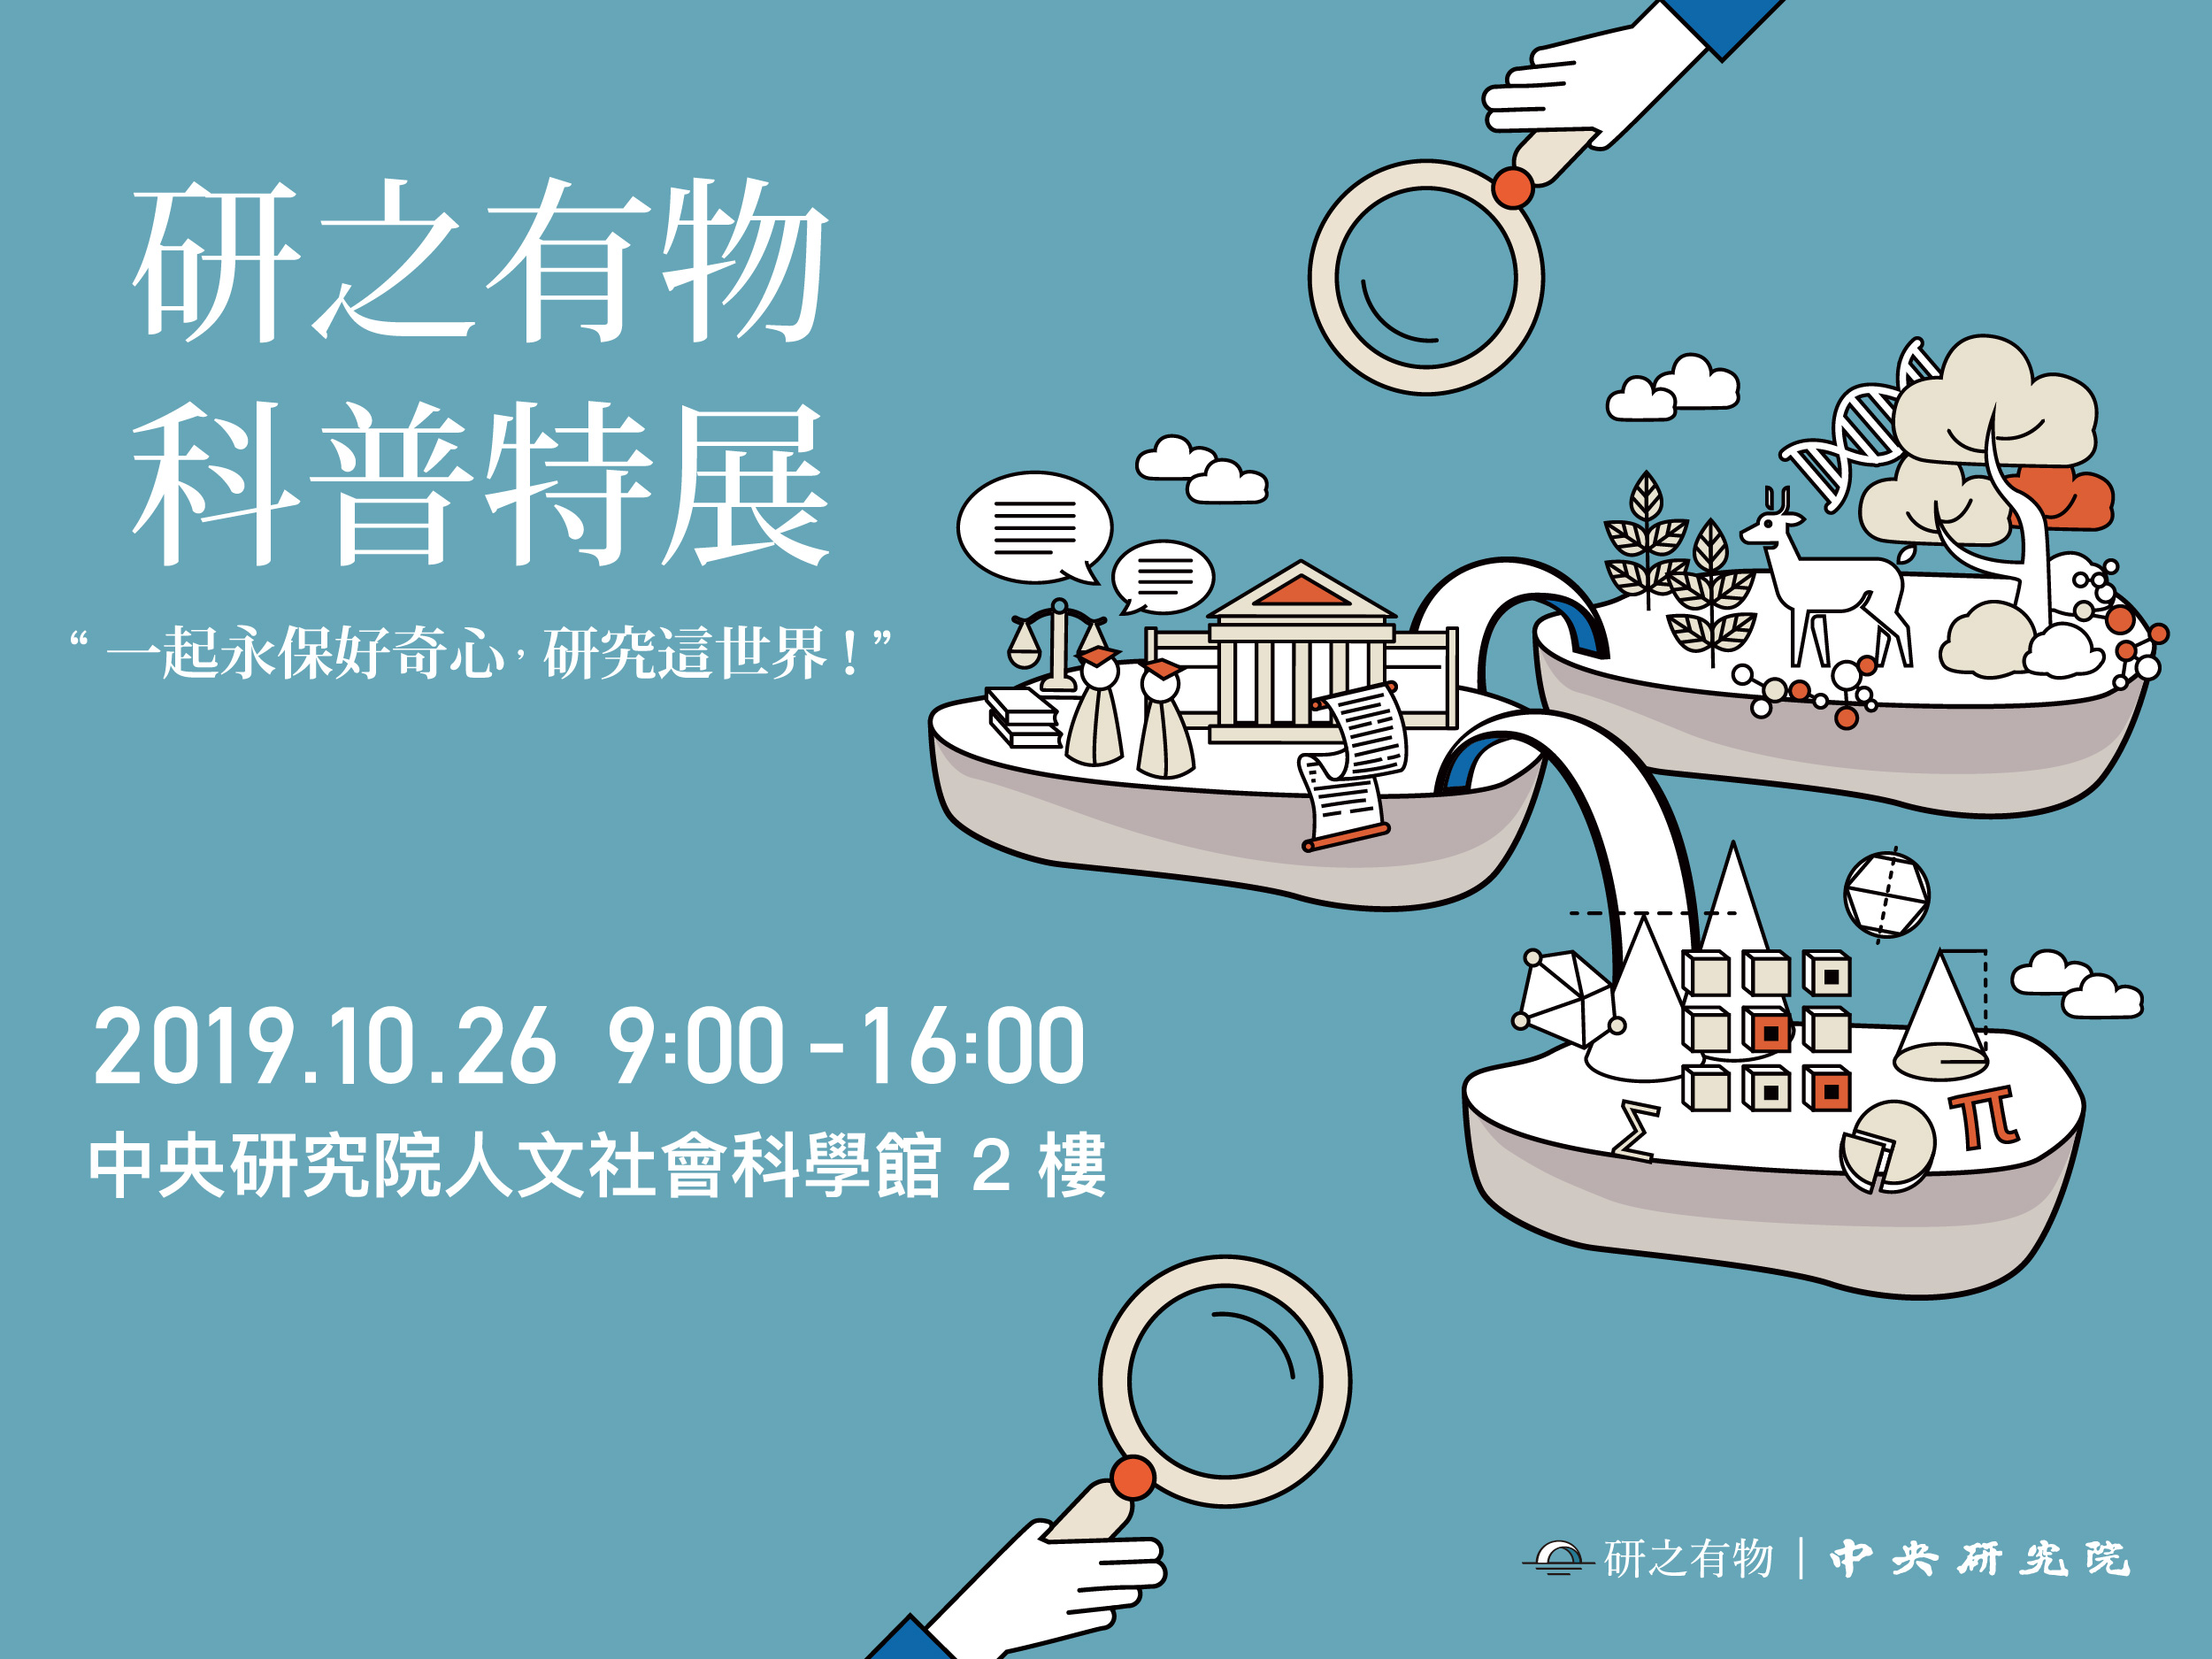 Explore the world with researchers at Academia Sinica